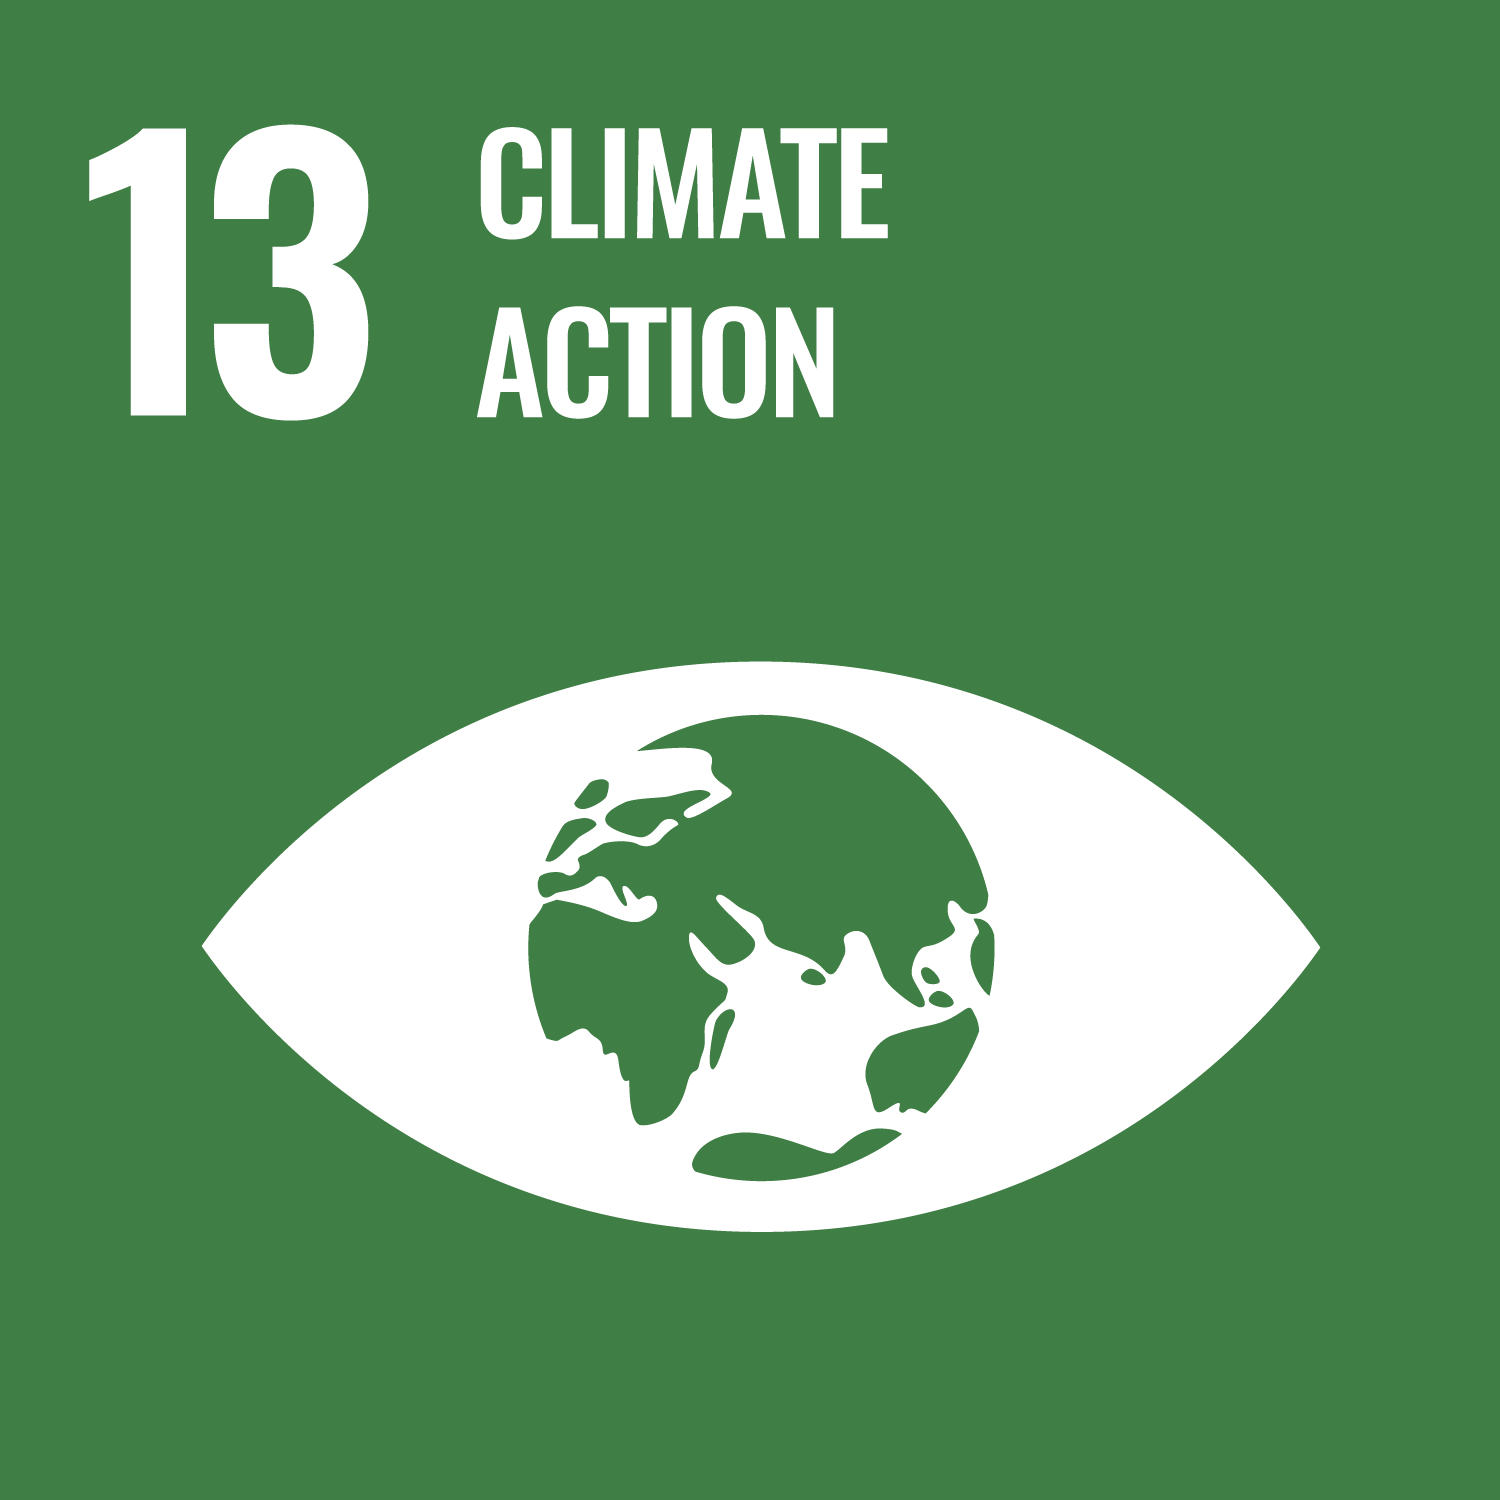 Graphic for SDG 13 Climate Action